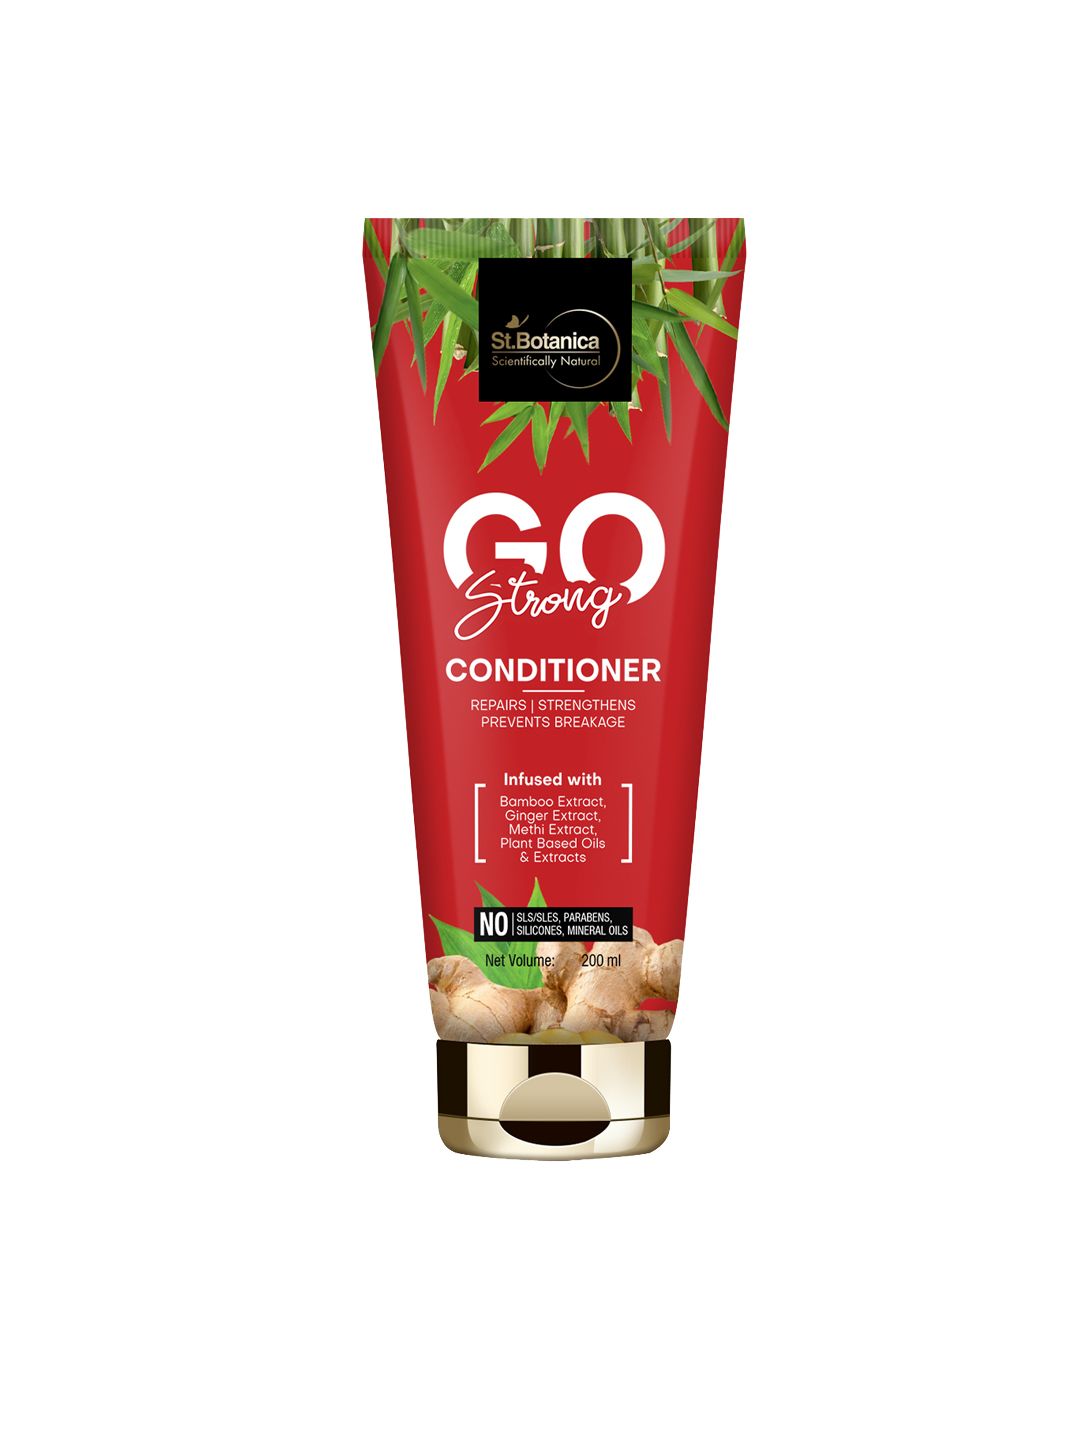 StBotanica Go Strong Conditioner 200ml Price in India